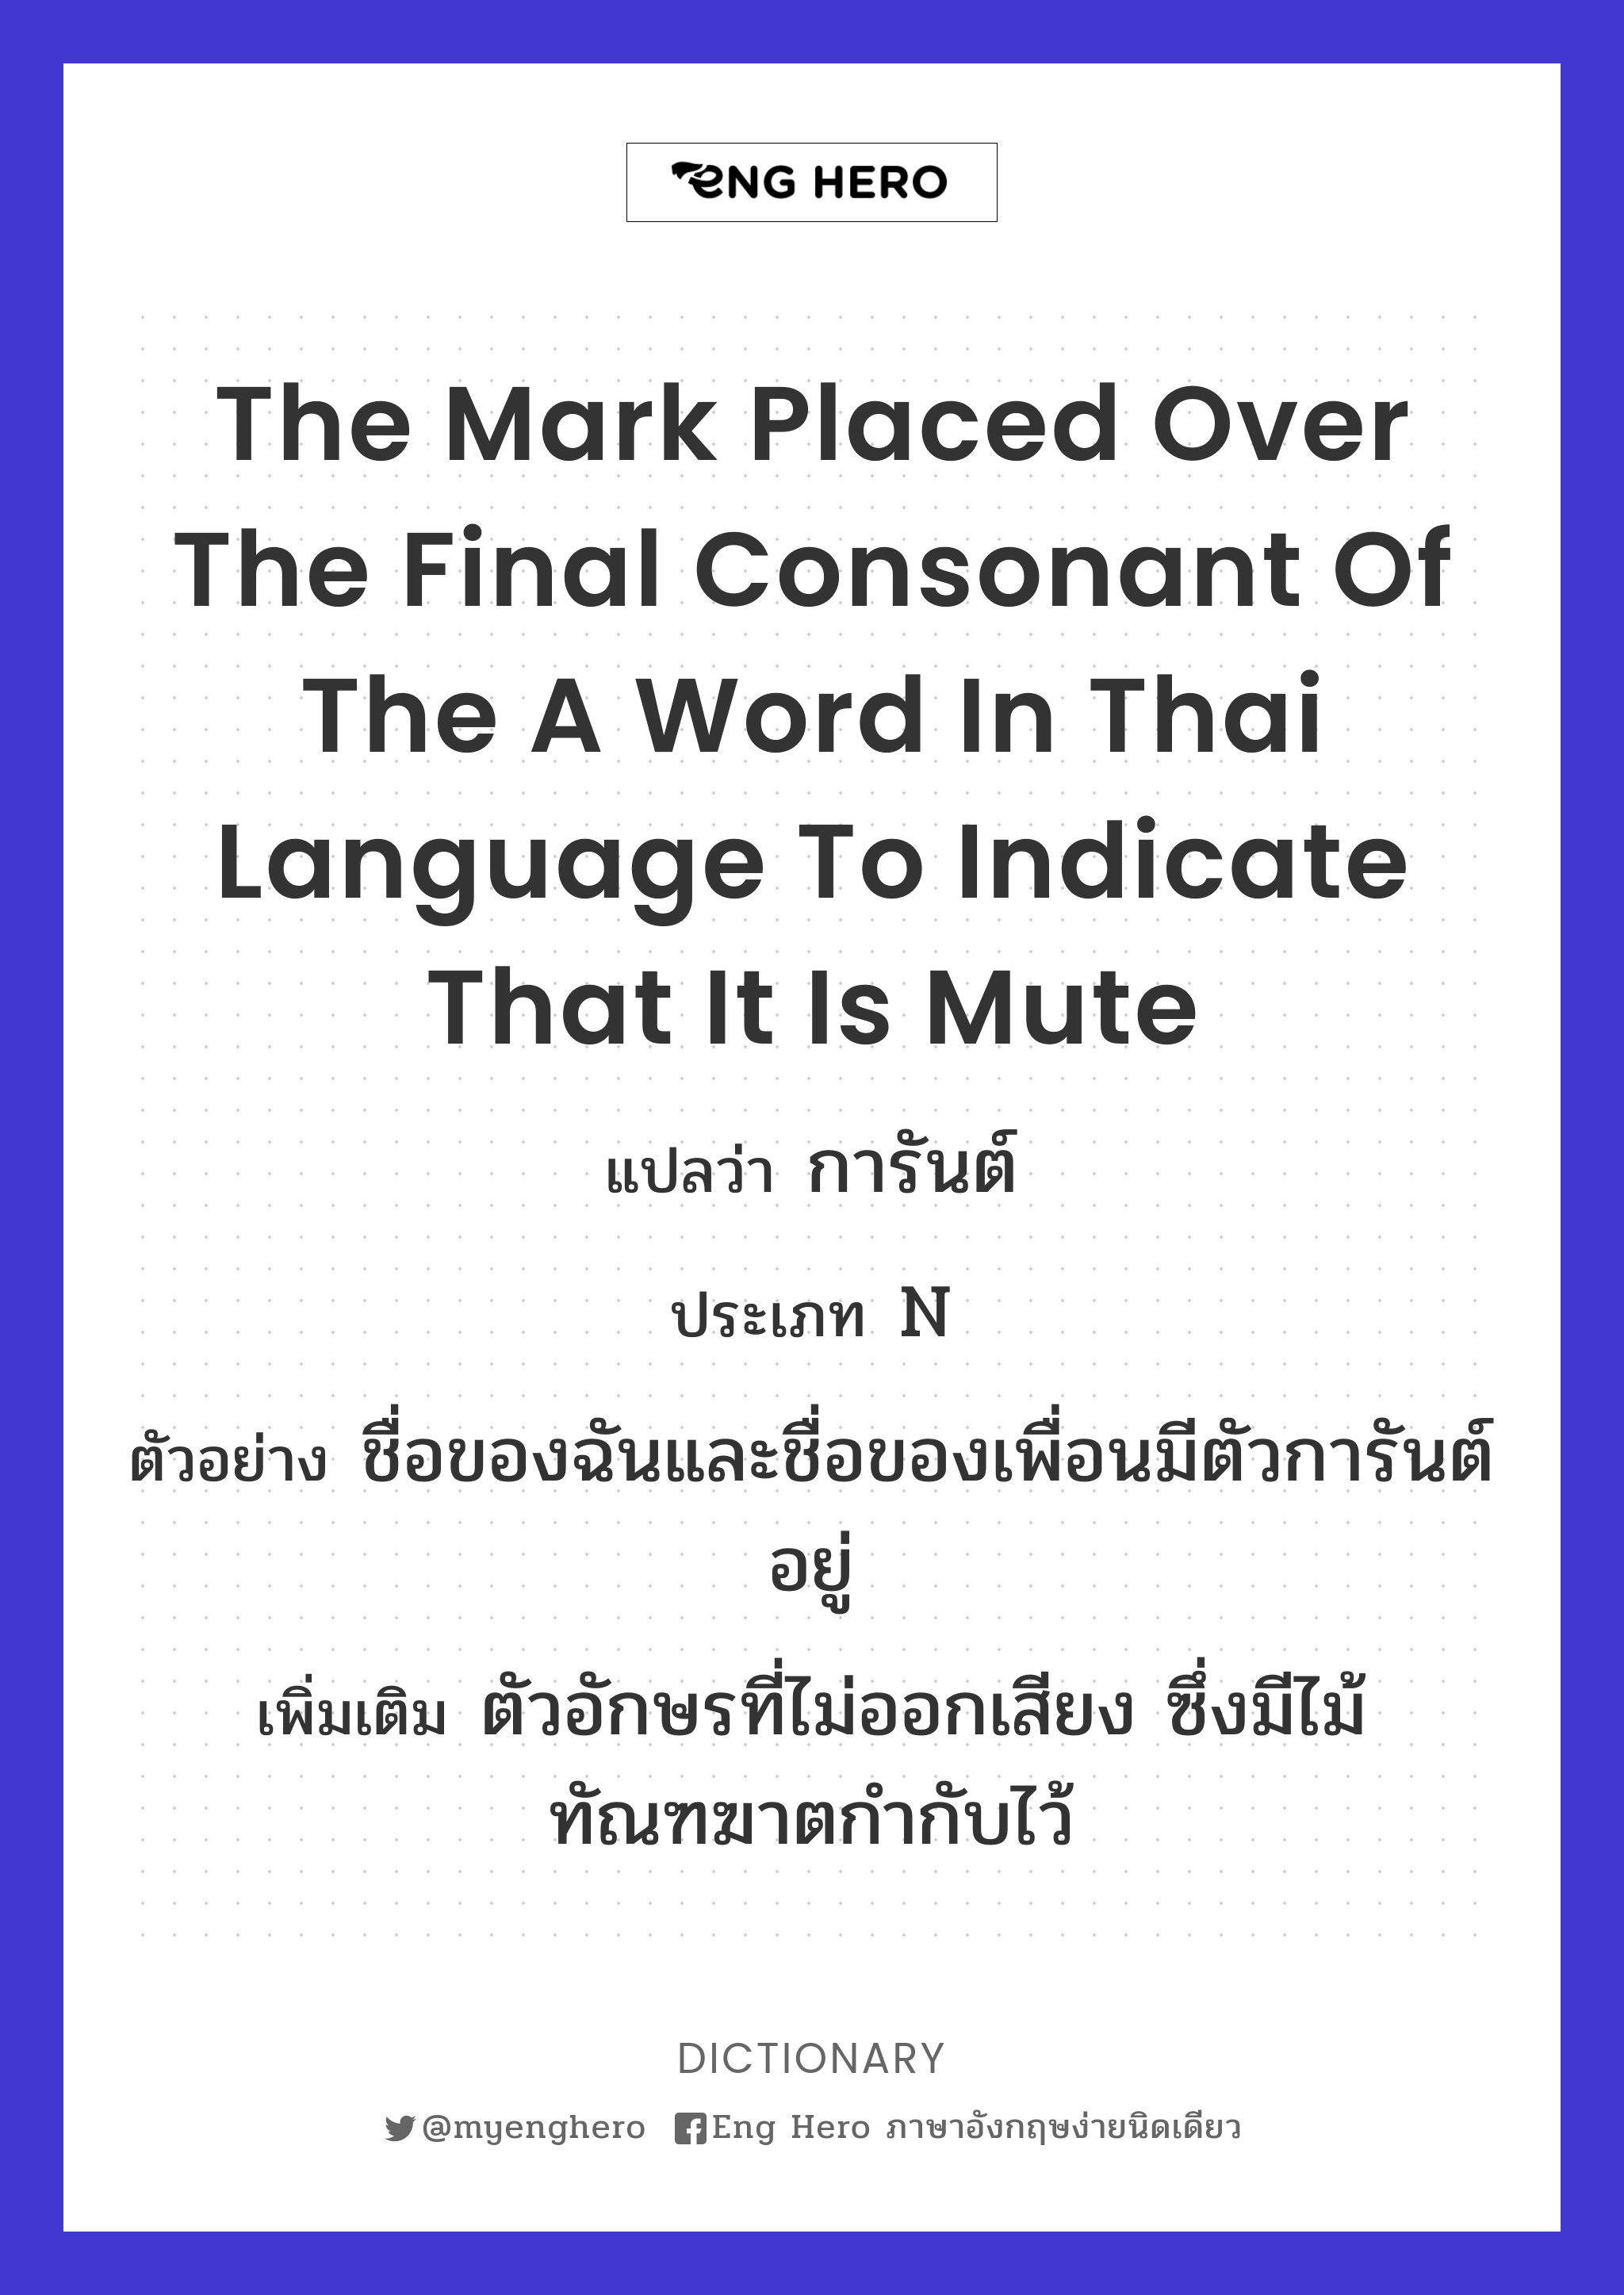 the mark placed over the final consonant of the a word in Thai language to indicate that it is mute